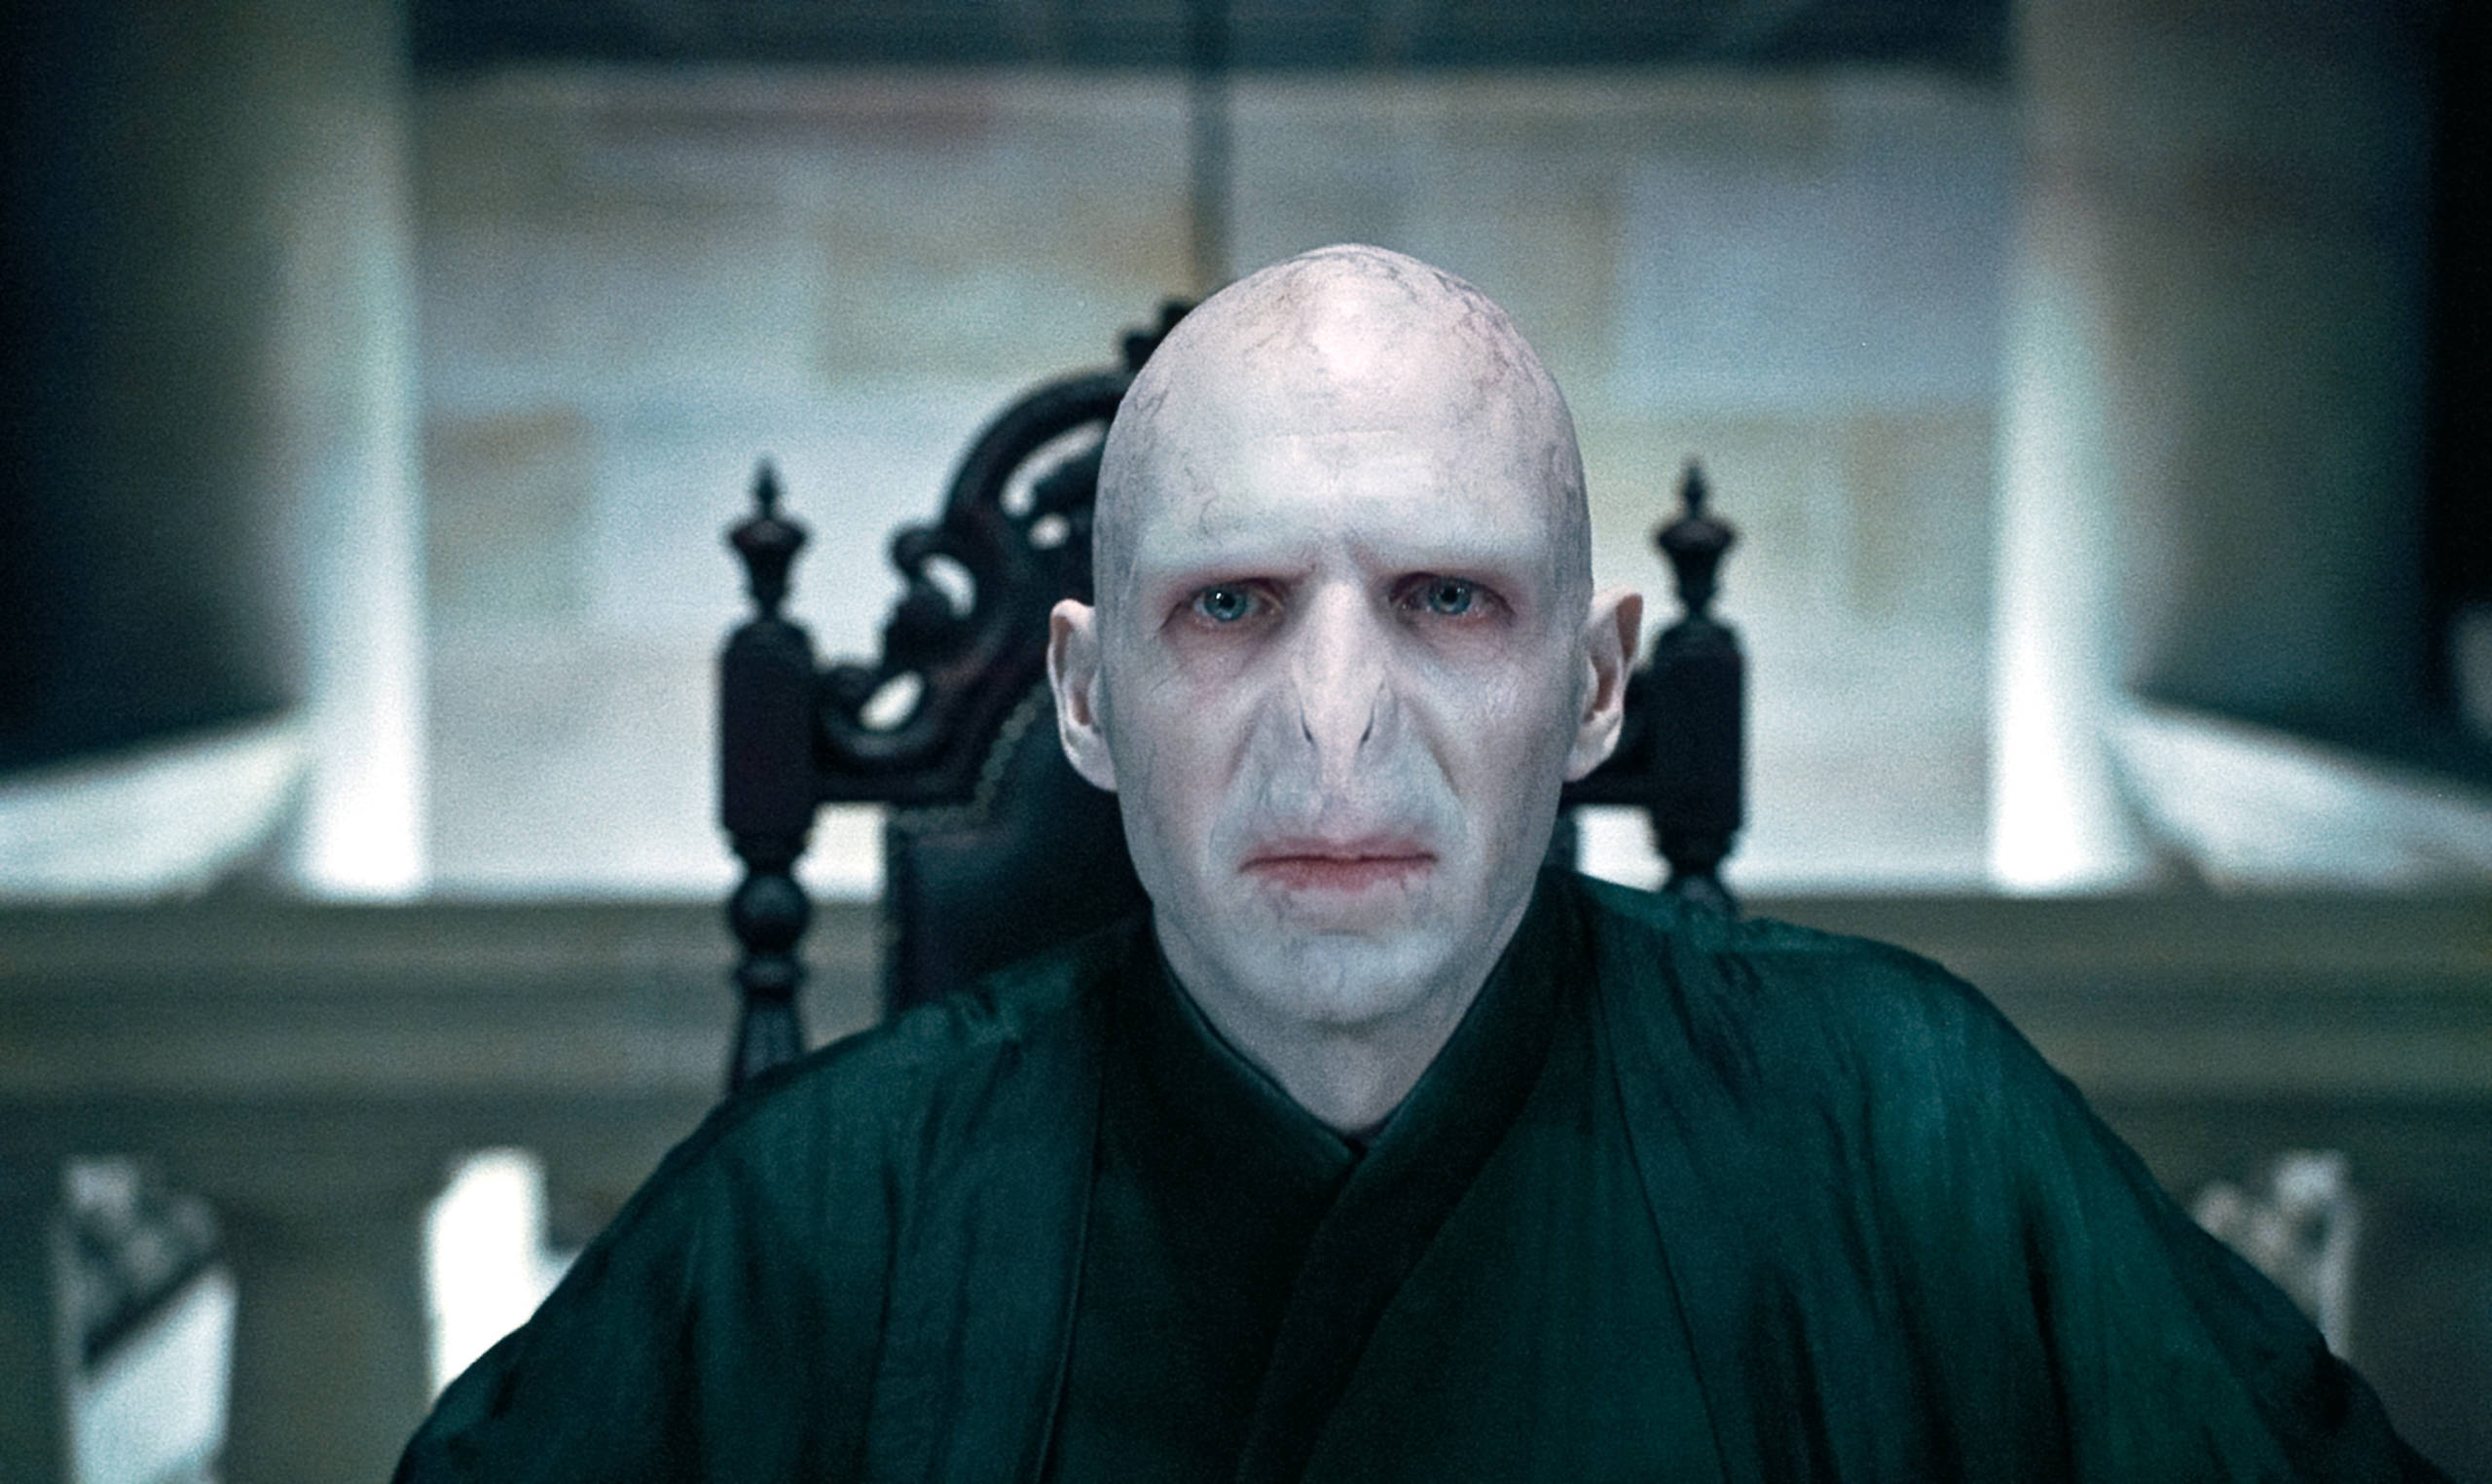 Who Is The Most Mysterious Villain In Harry Potter?